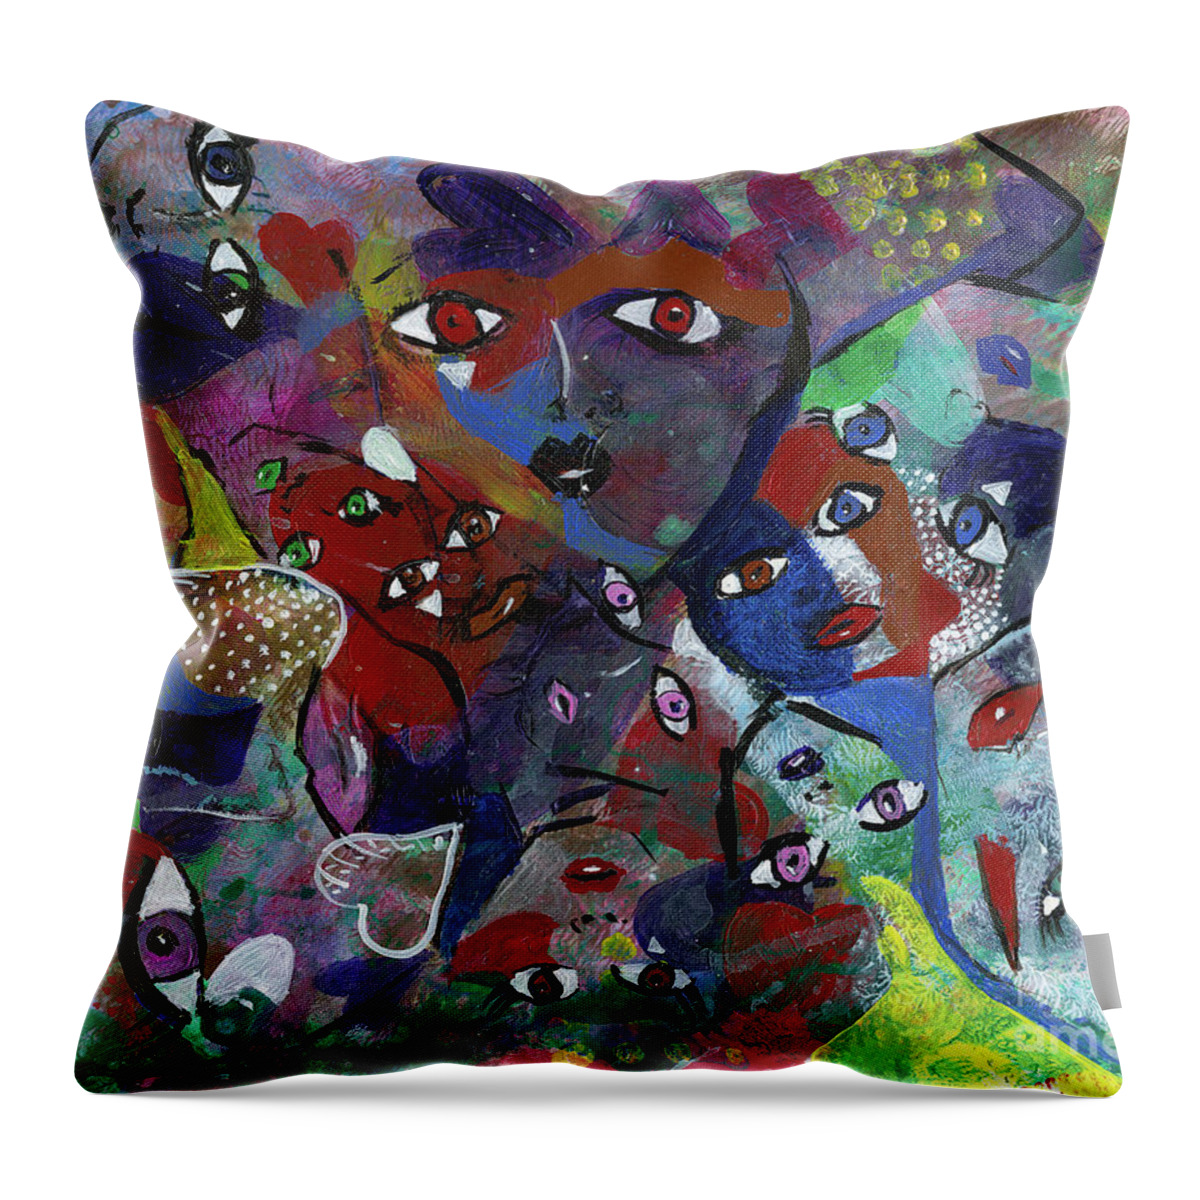 Eyes Throw Pillow featuring the painting Eyes Have It by Tessa Evette